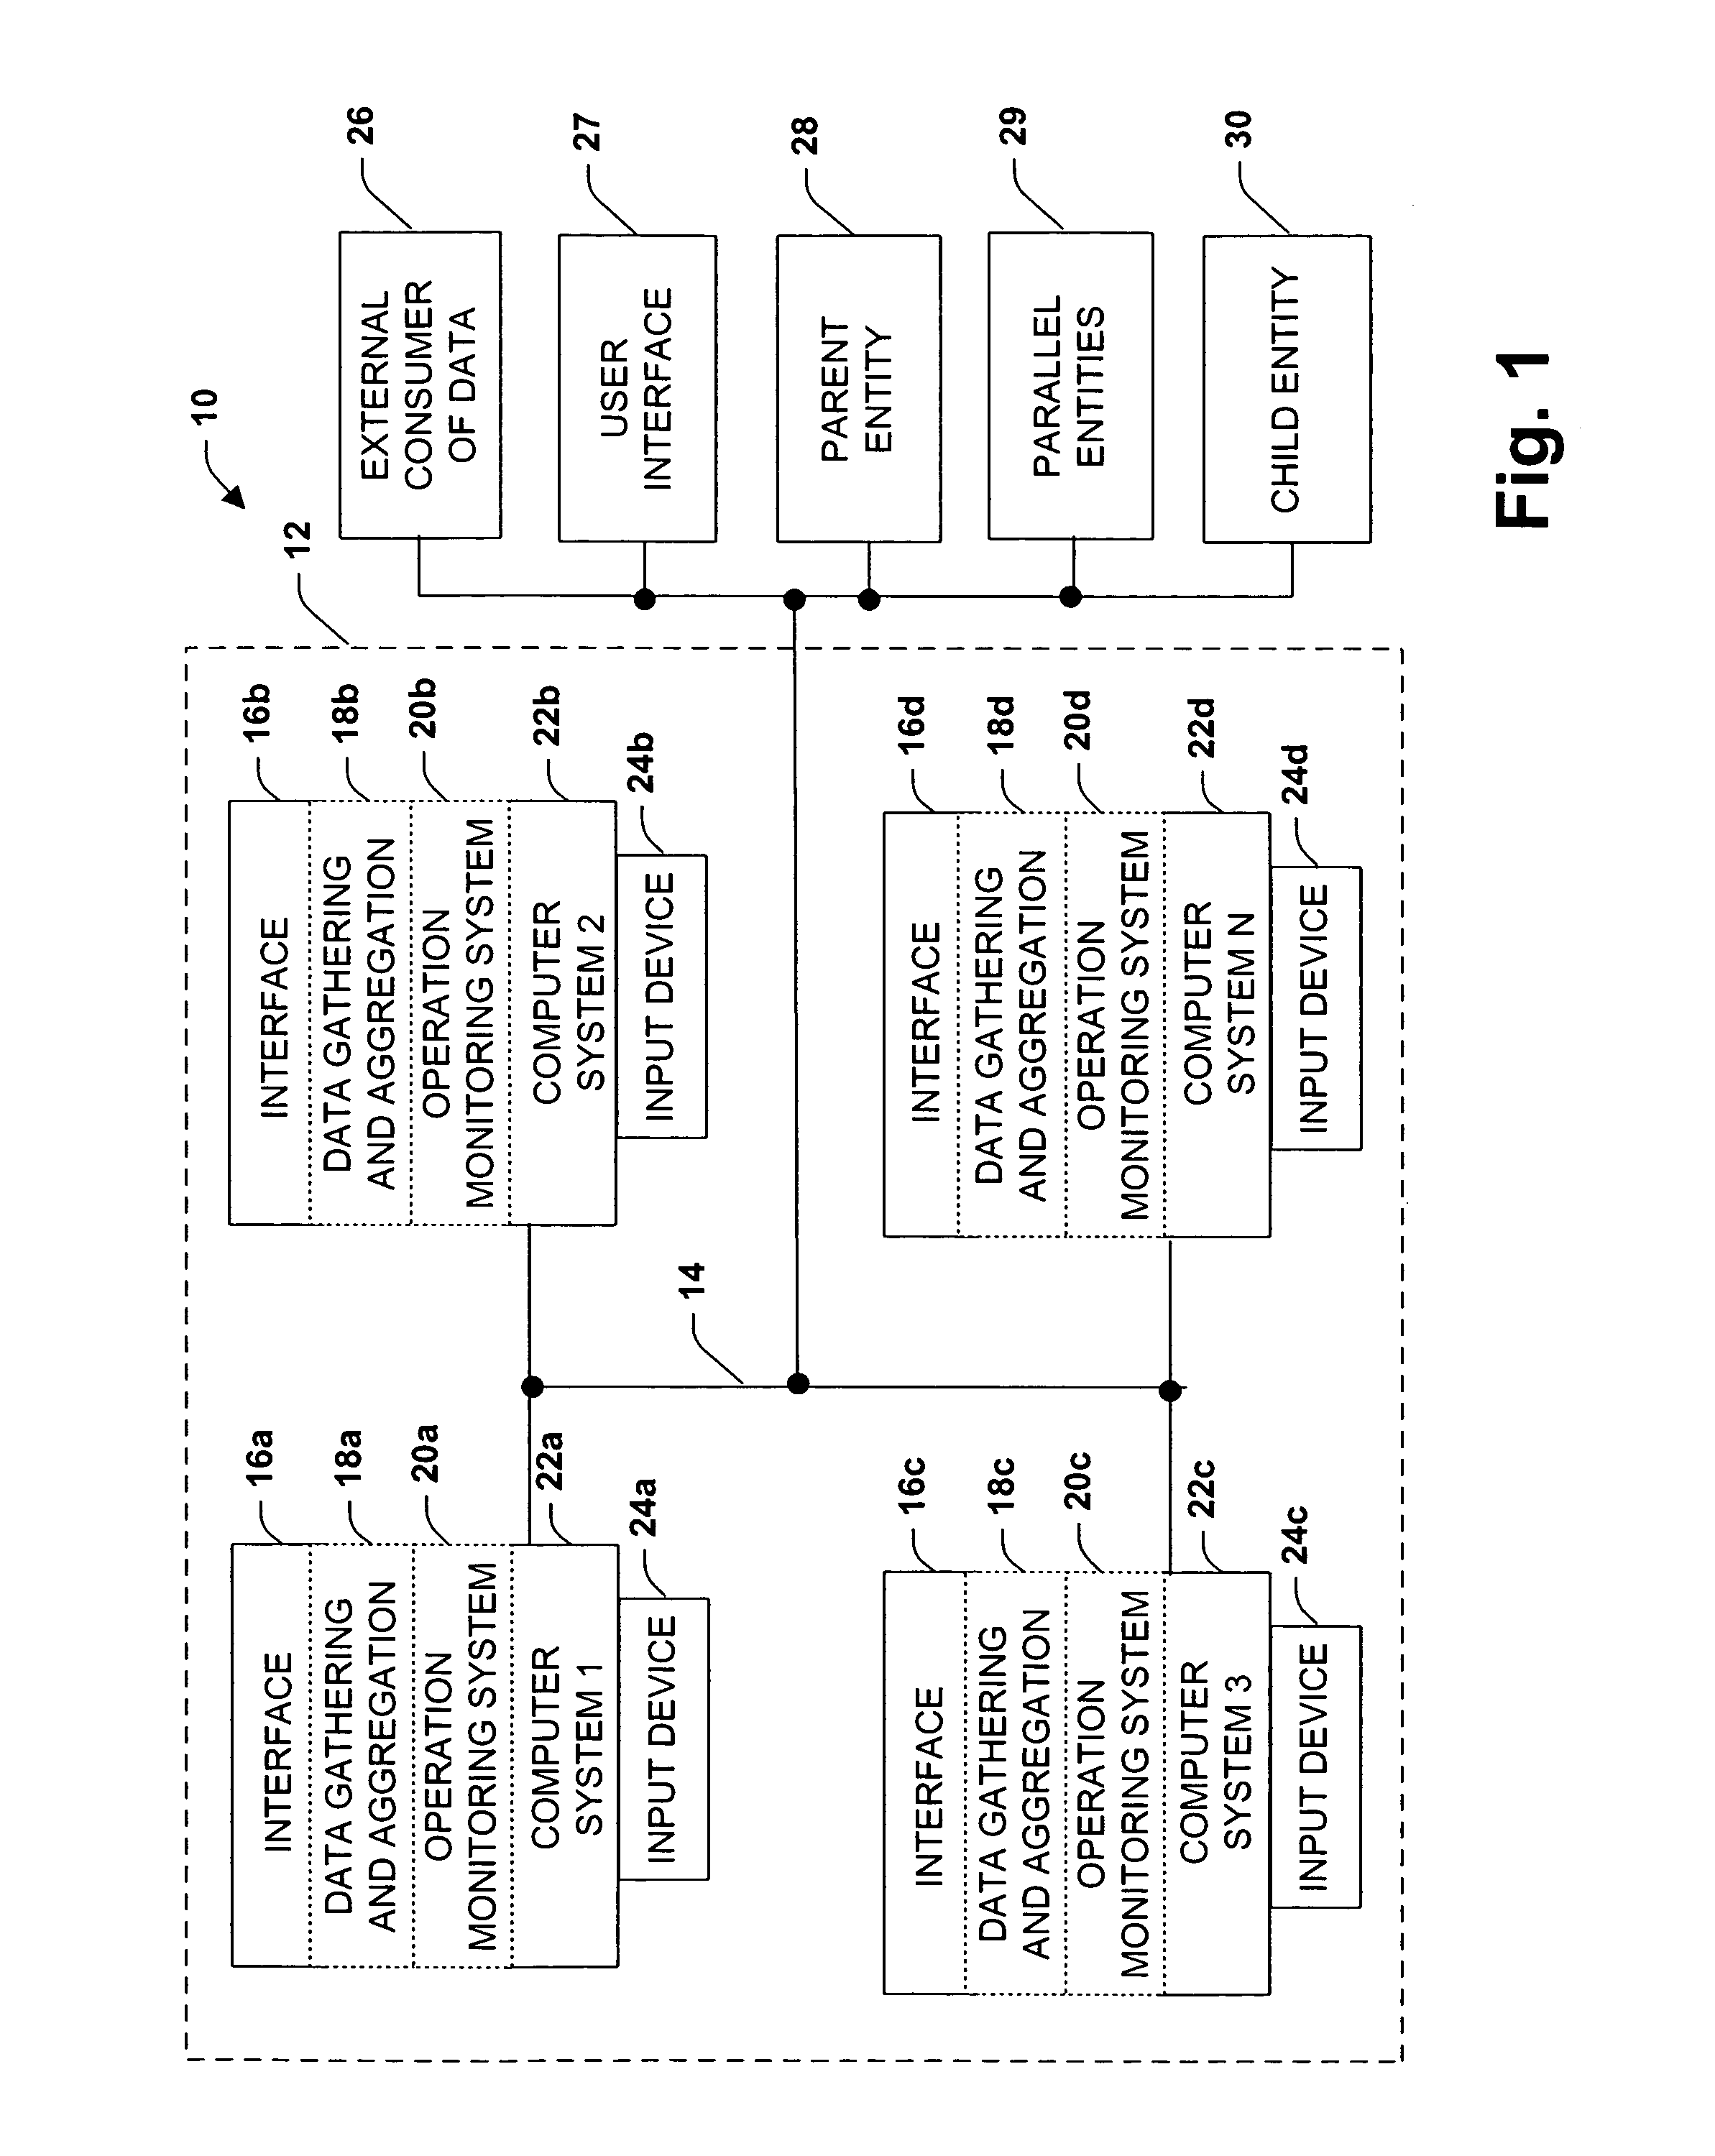 Distributed data gathering and aggregation agent